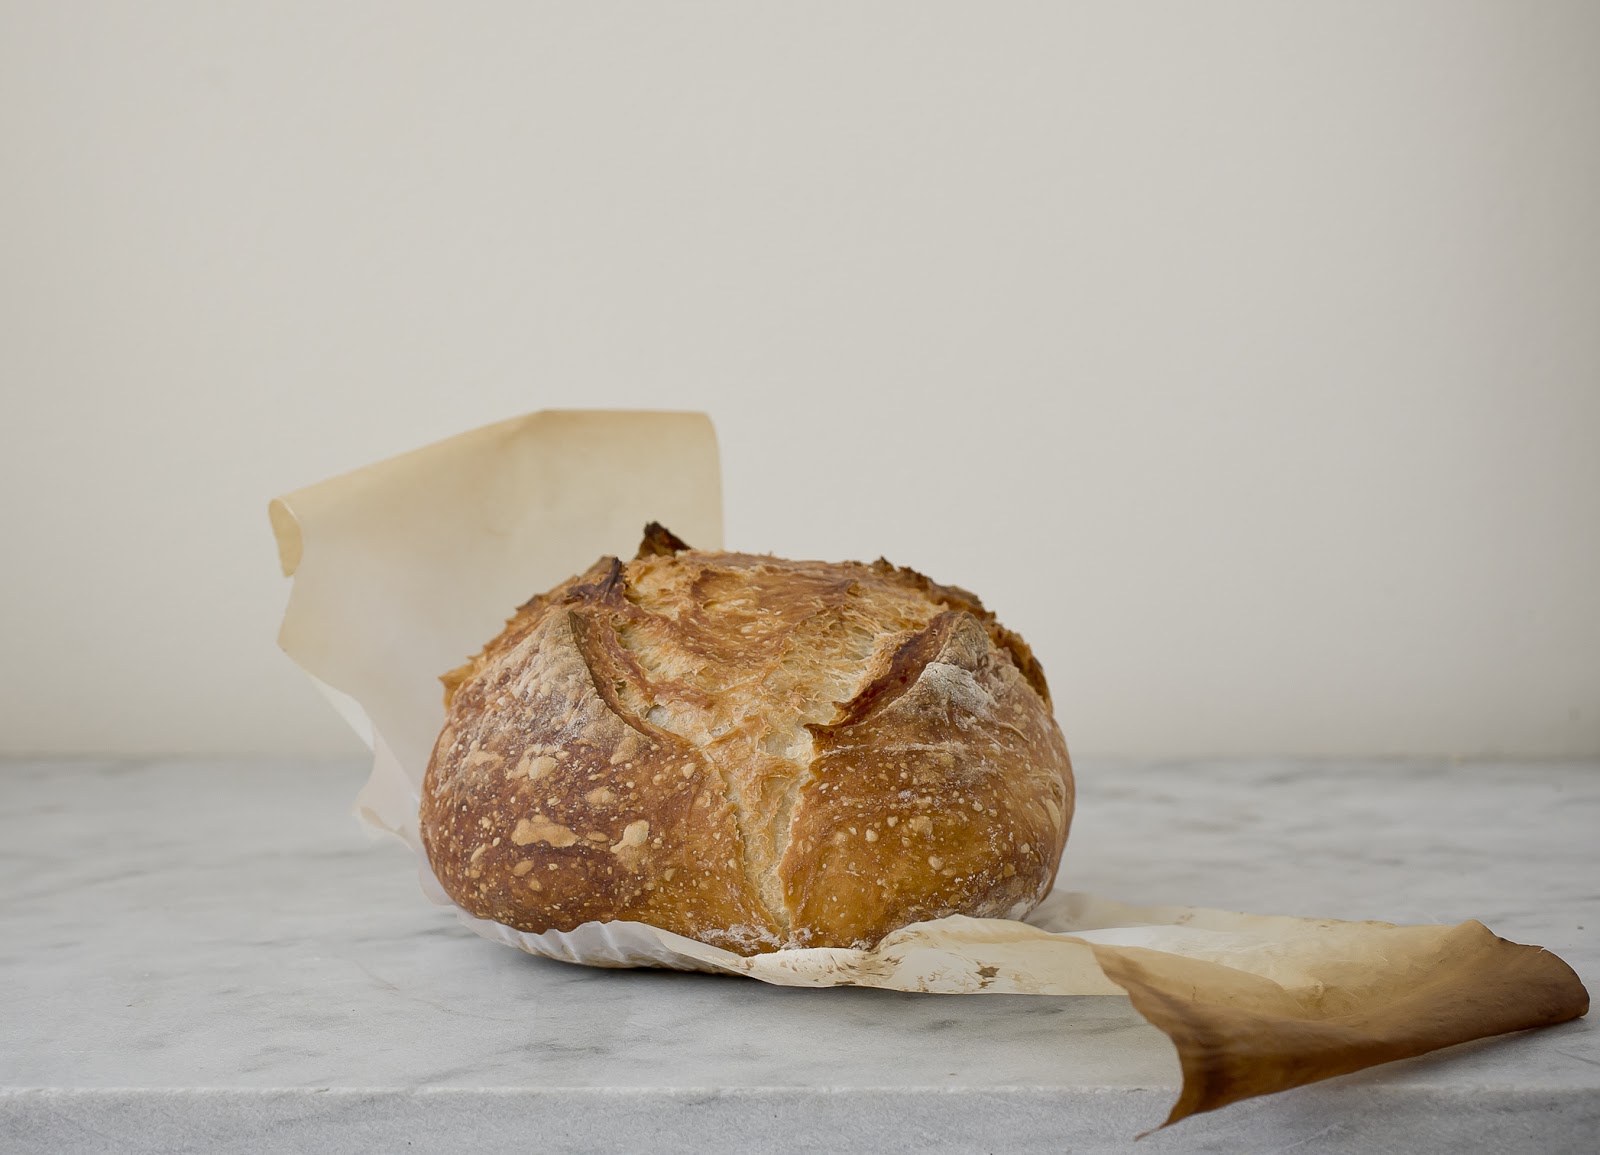 Mark Bittman's No-Knead Bread recipe with variations at A Stack of Dishes